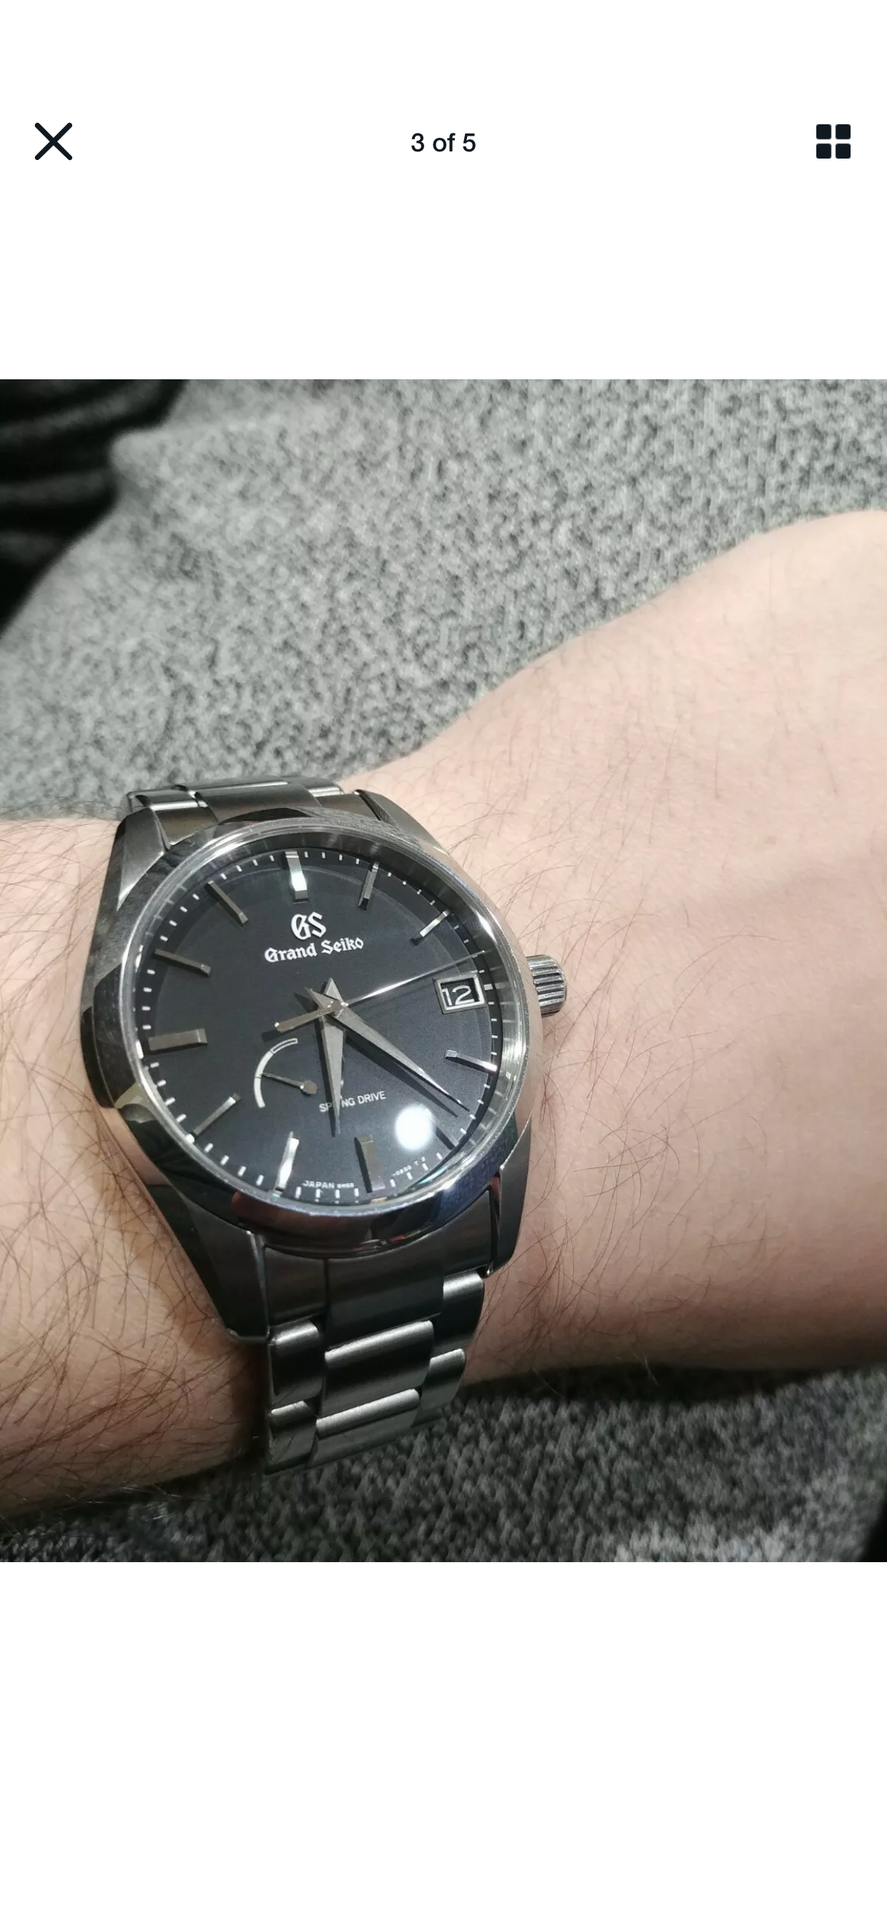 Is this a fake GS? | WatchUSeek Watch Forums